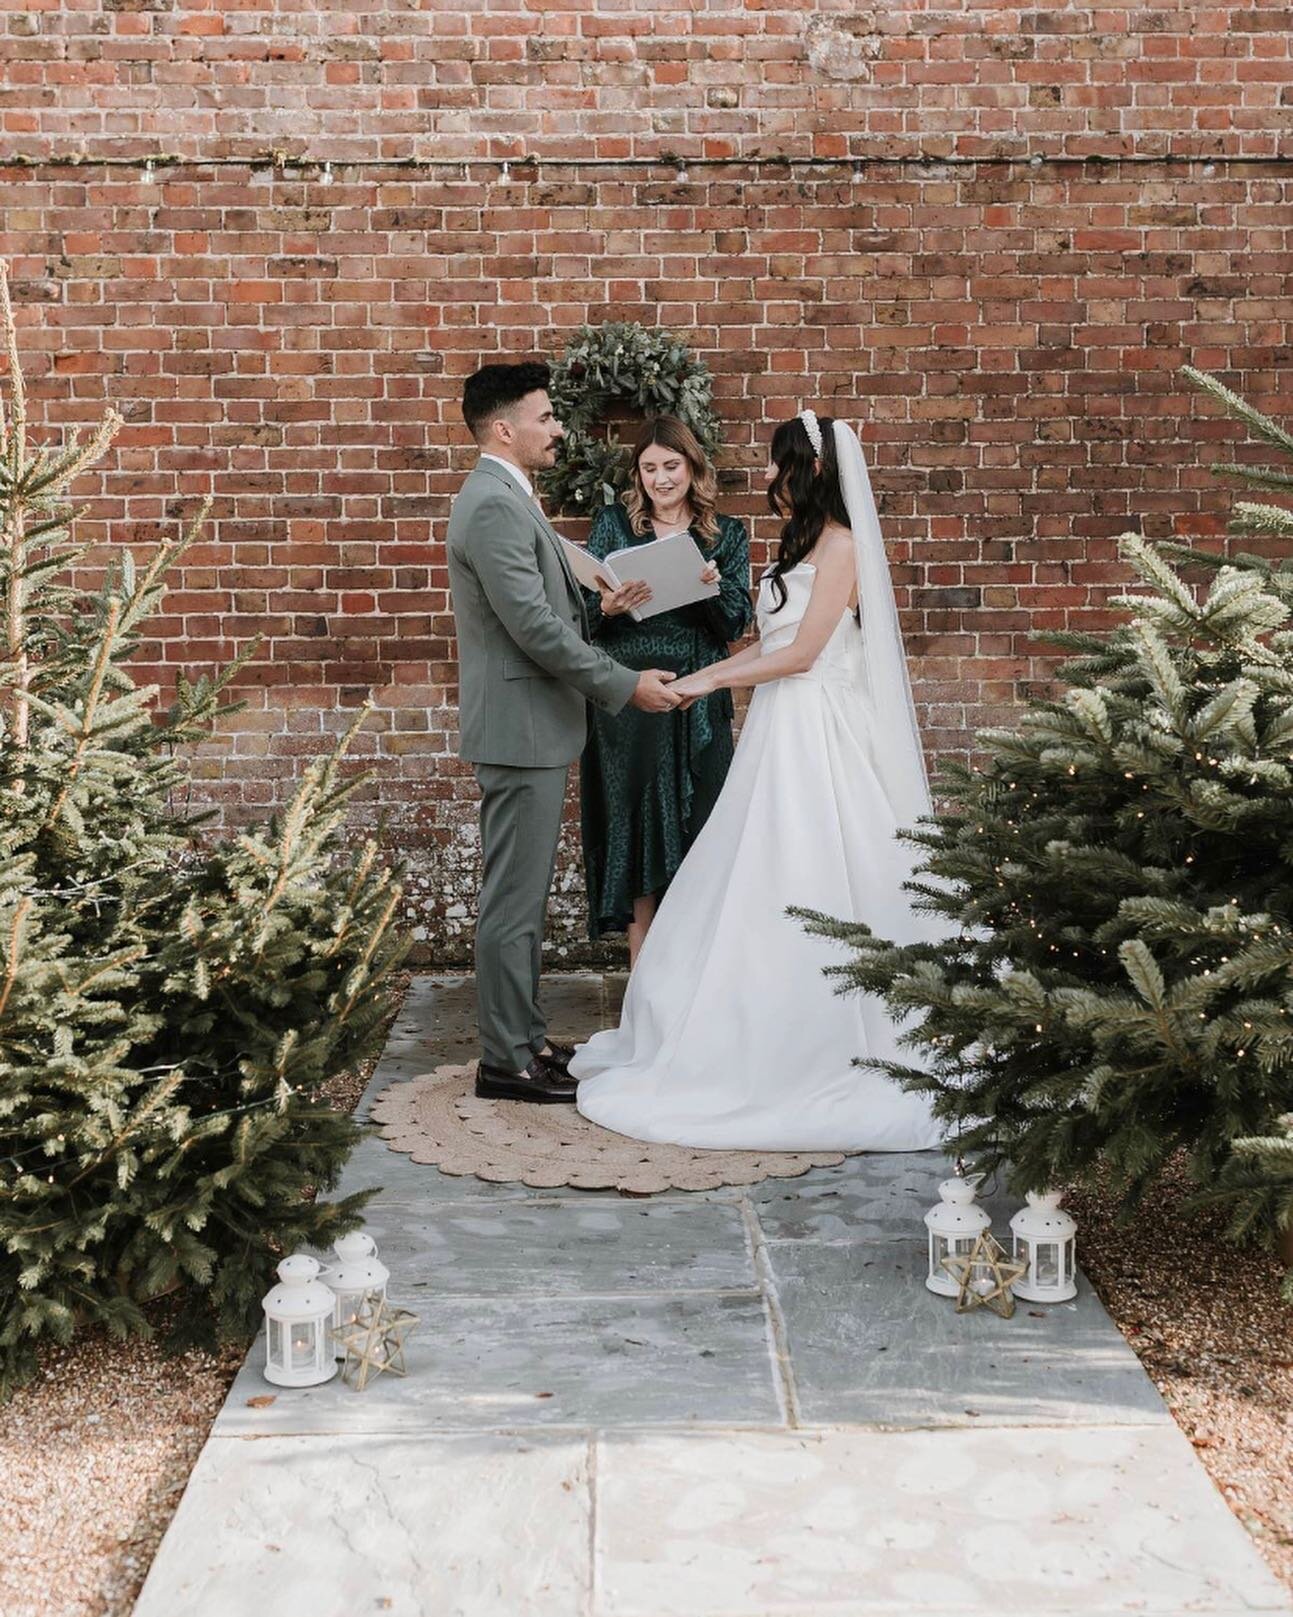 So, you want a luxurious and elegant vibe for your wedding, but also want Christmas. Our festive inspired styled shoot at new venue @ripplecourtestate will serve as the perfect inspiration! ✨

#christmaswedding #festivewedding #winterwedding #kentwed